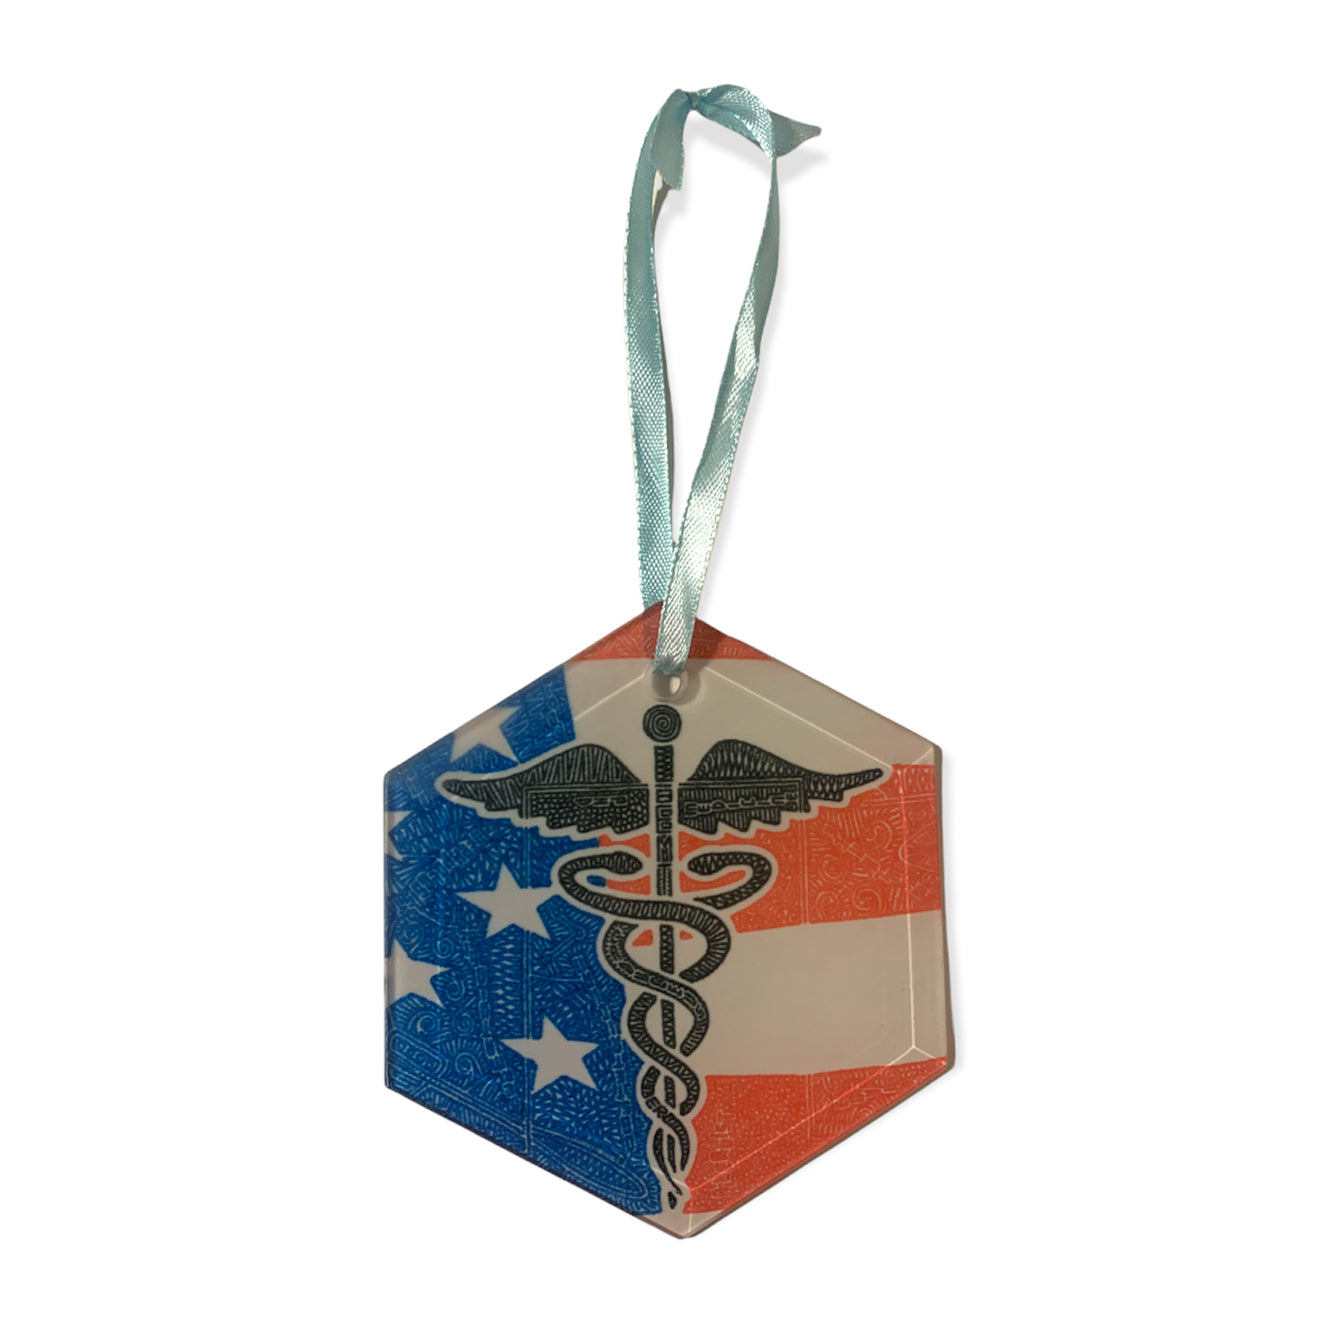 Glass Ornaments - Healthcare Heroes